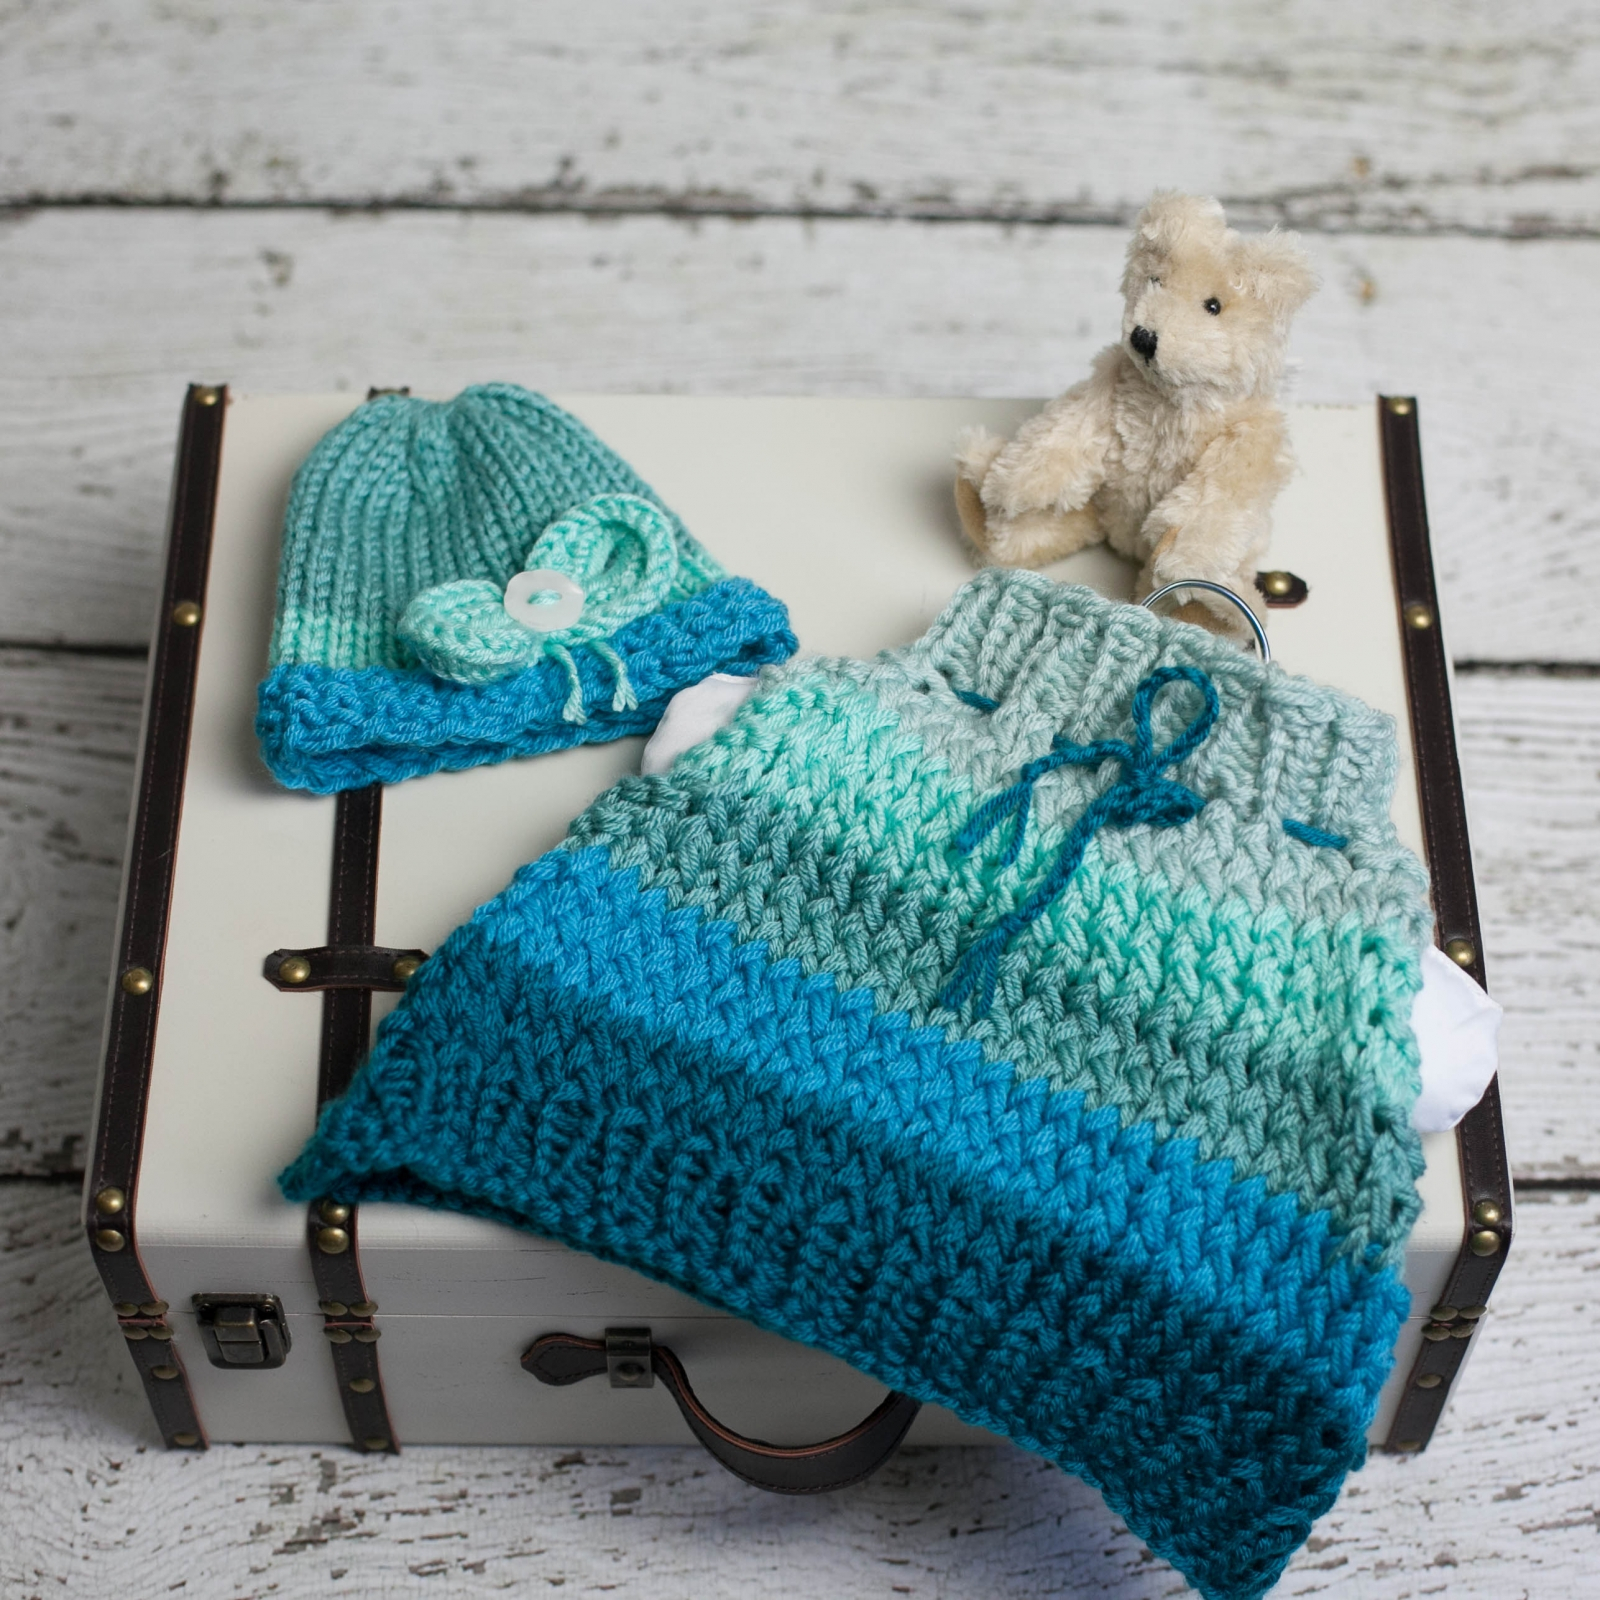 Knitting Patterns Newborn Loom Knit Poncho Hat Set Pattern For Newborn Ba Cape Hat With Bow Ombre Color Loom Knitting Pattern Pdf